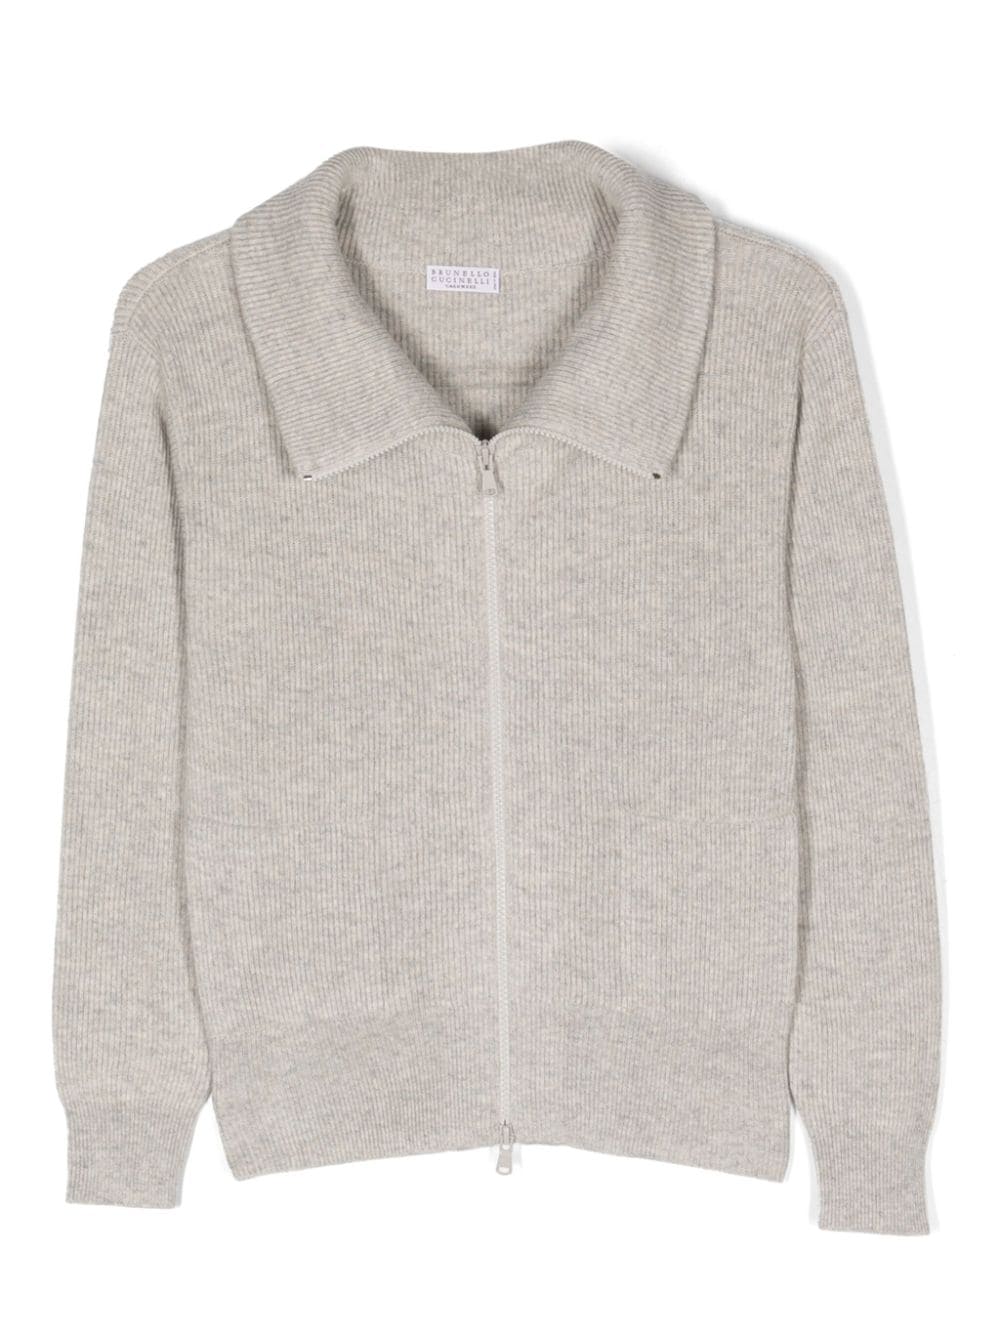 Brunello Cucinelli Kids zip-up ribbed-knit cashmere cardigan - Grey von Brunello Cucinelli Kids